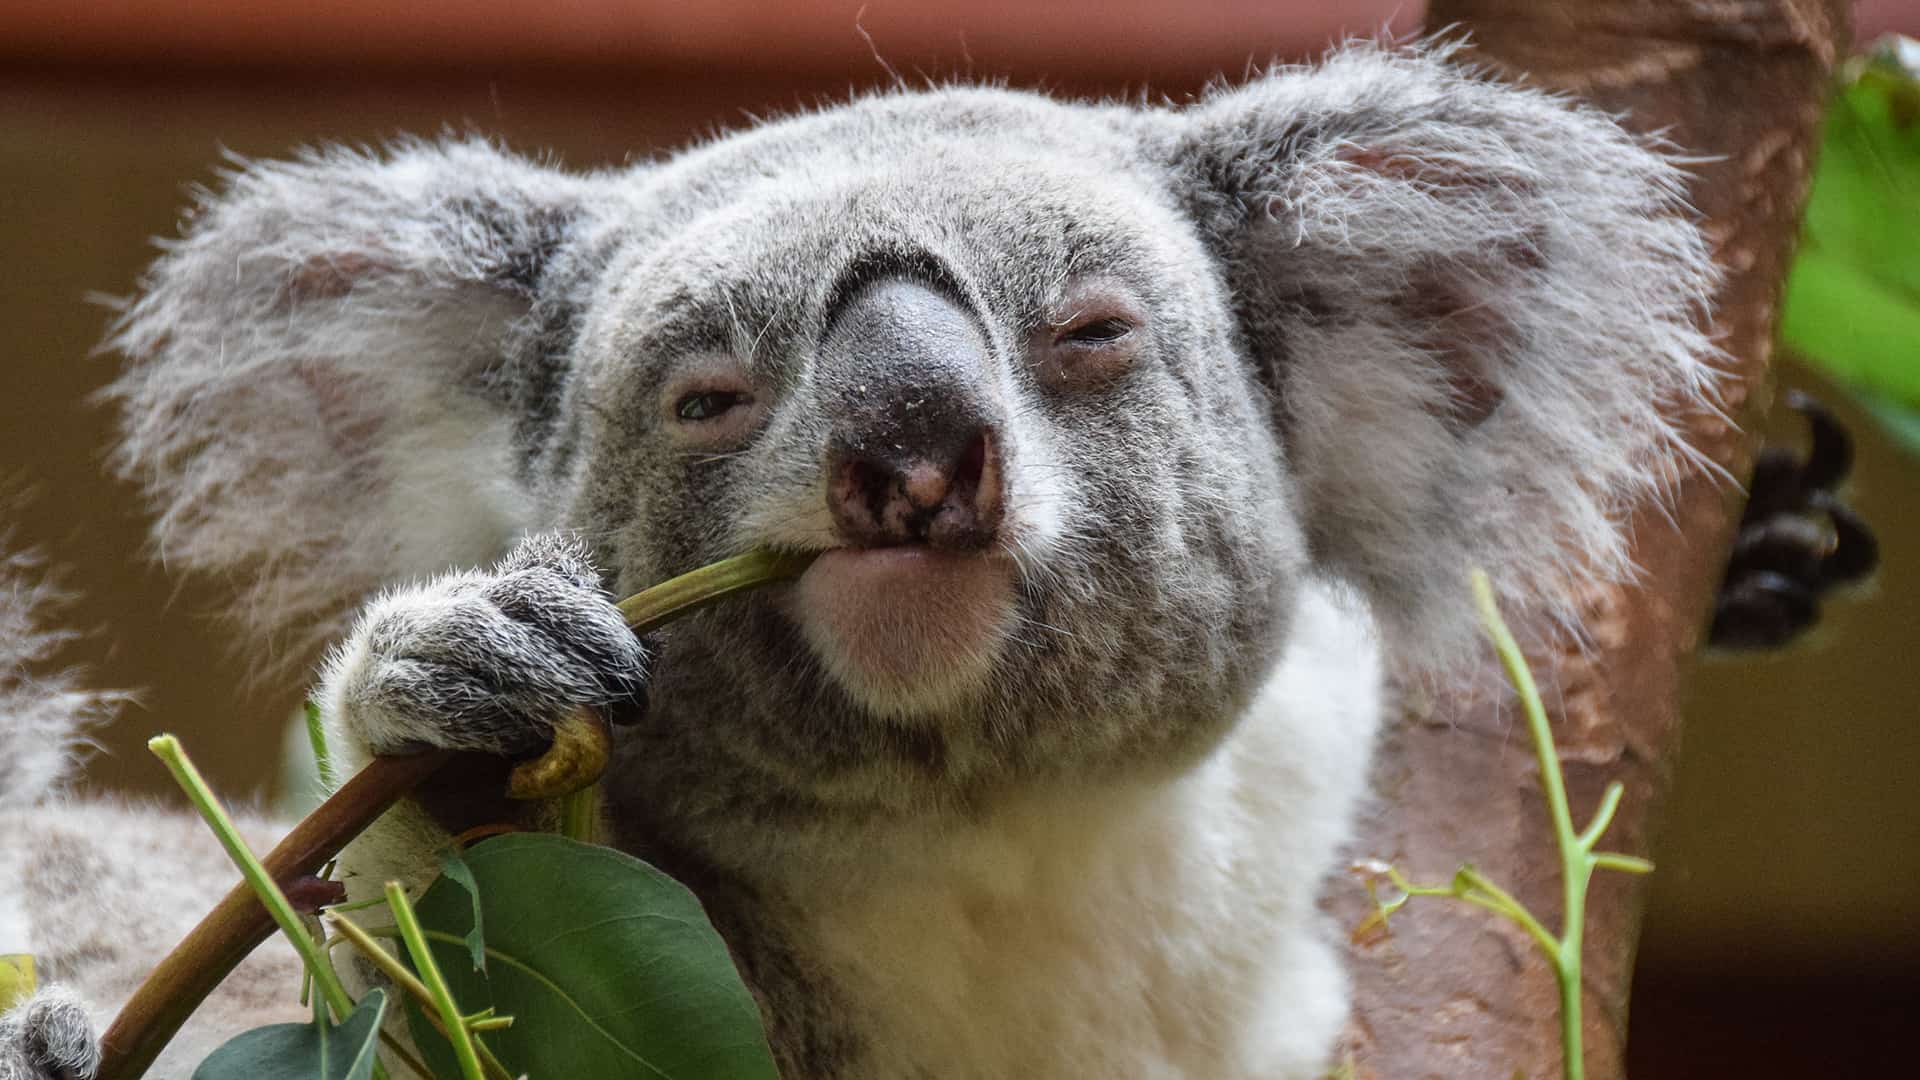 Koala fingerprints are so close to humans' that they could taint crime scenes